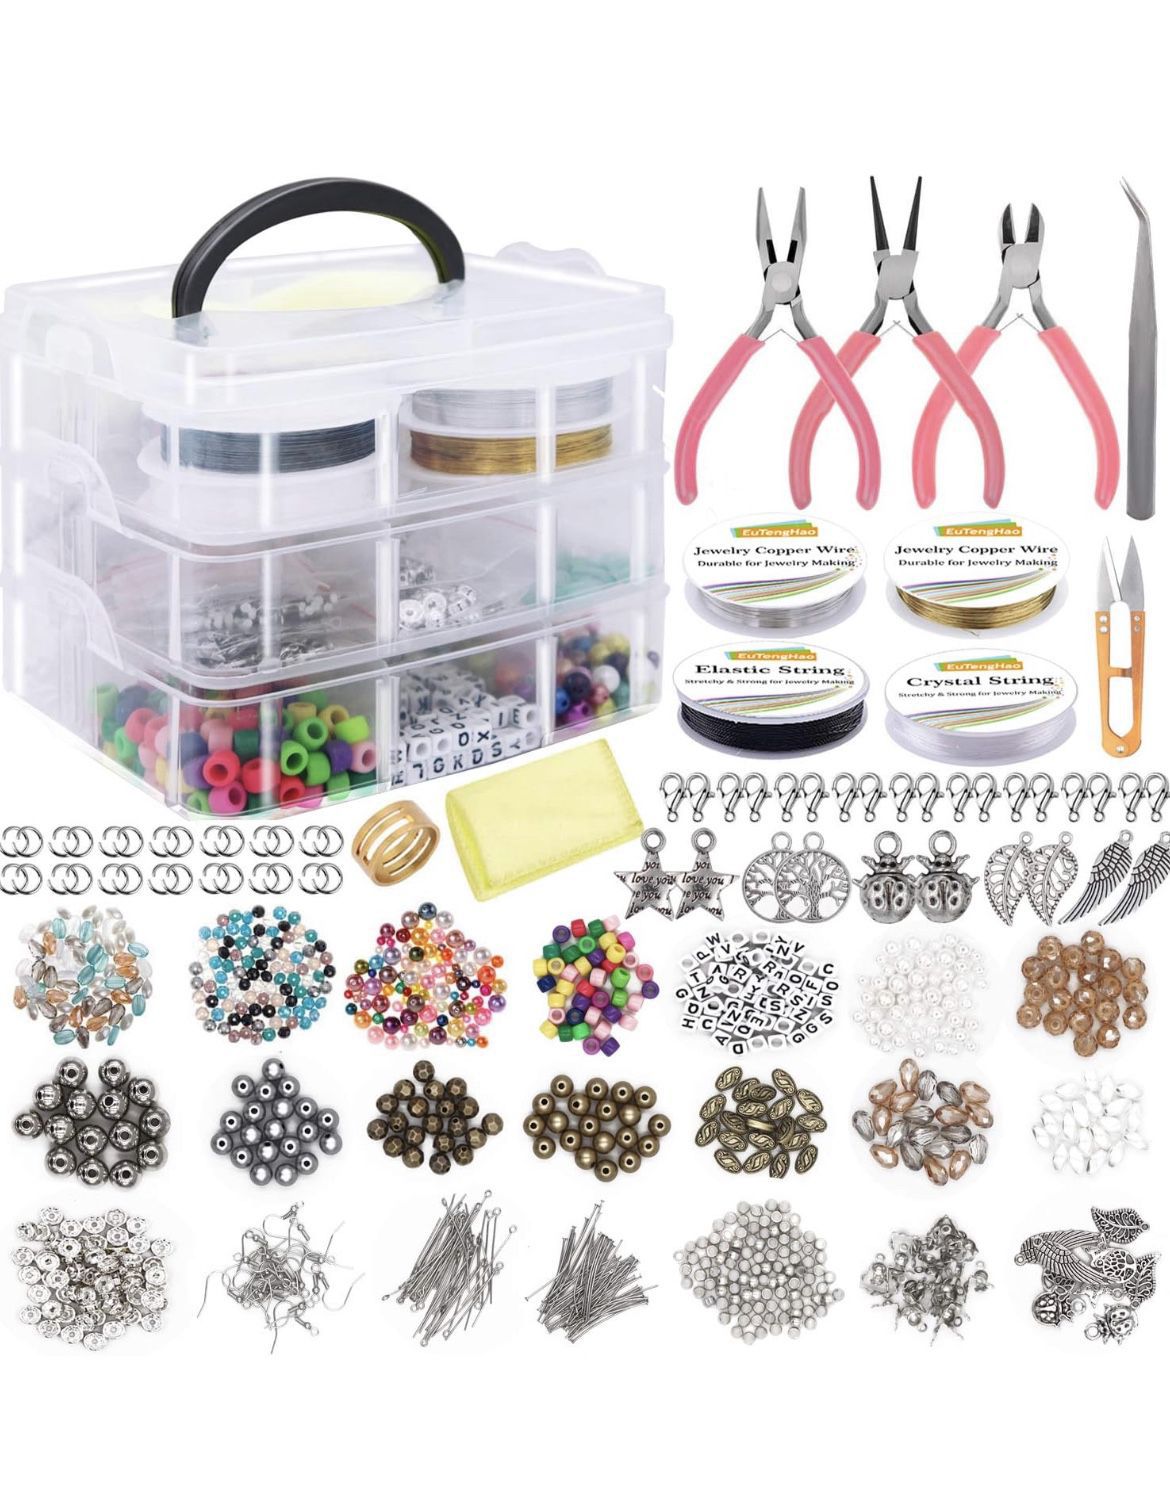 EuTengHao The jewelry manufacturing supply kit includes assorted beads, beads, beads, spacer beads, wire cable pliers for repairing necklaces, earring